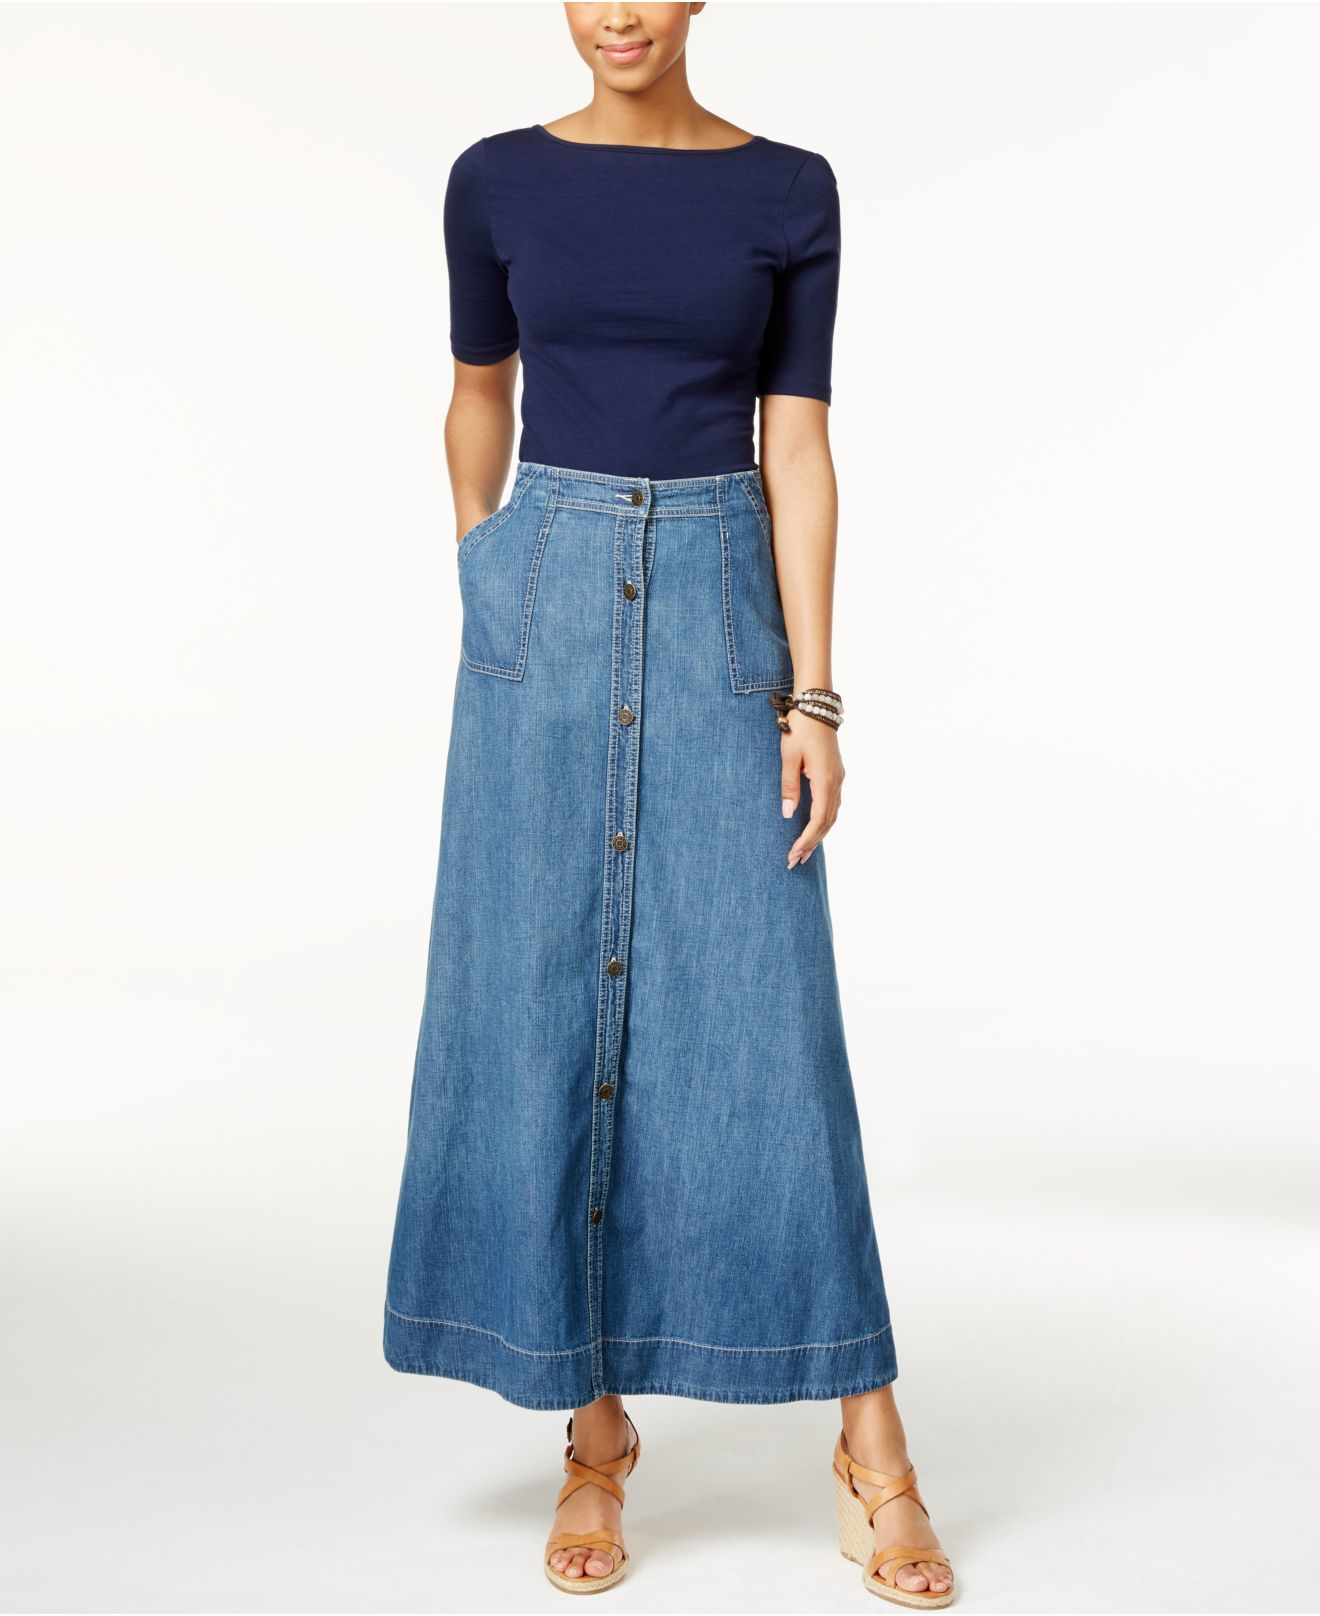 Lyst - American Living Button Front Denim Maxi Skirt in Blue